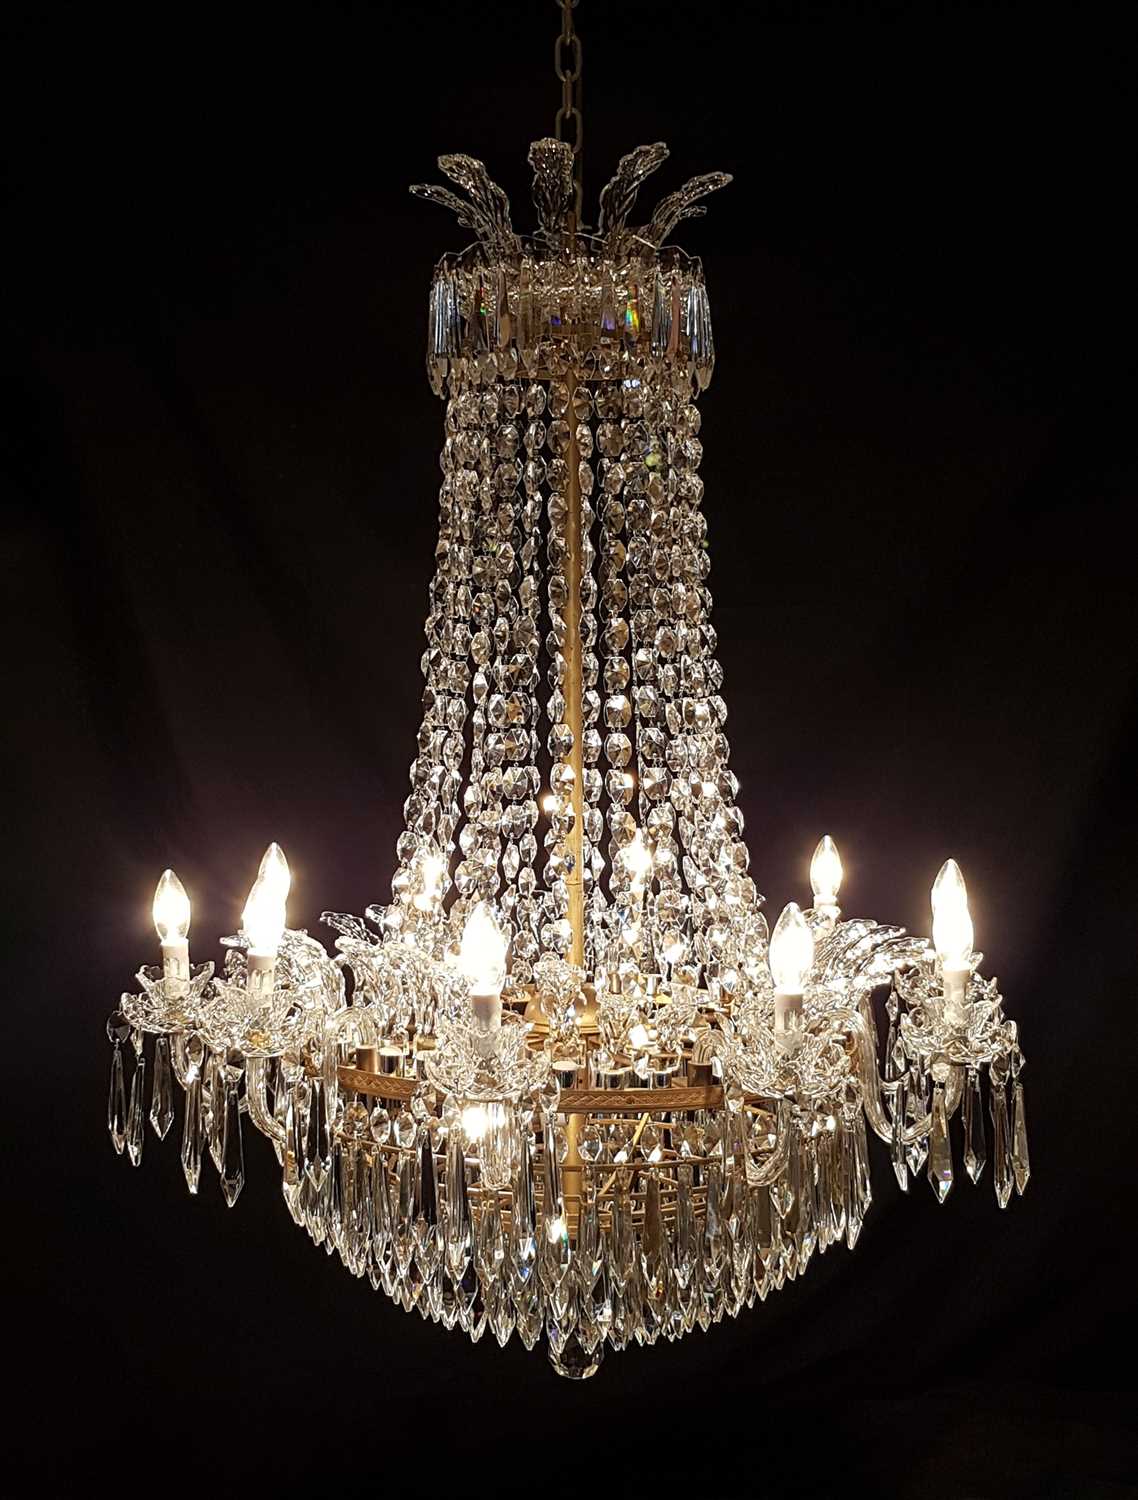 Lot 477 - An impressive ten-light cut glass chandelier, by Waterford Crystal, circa 1970.